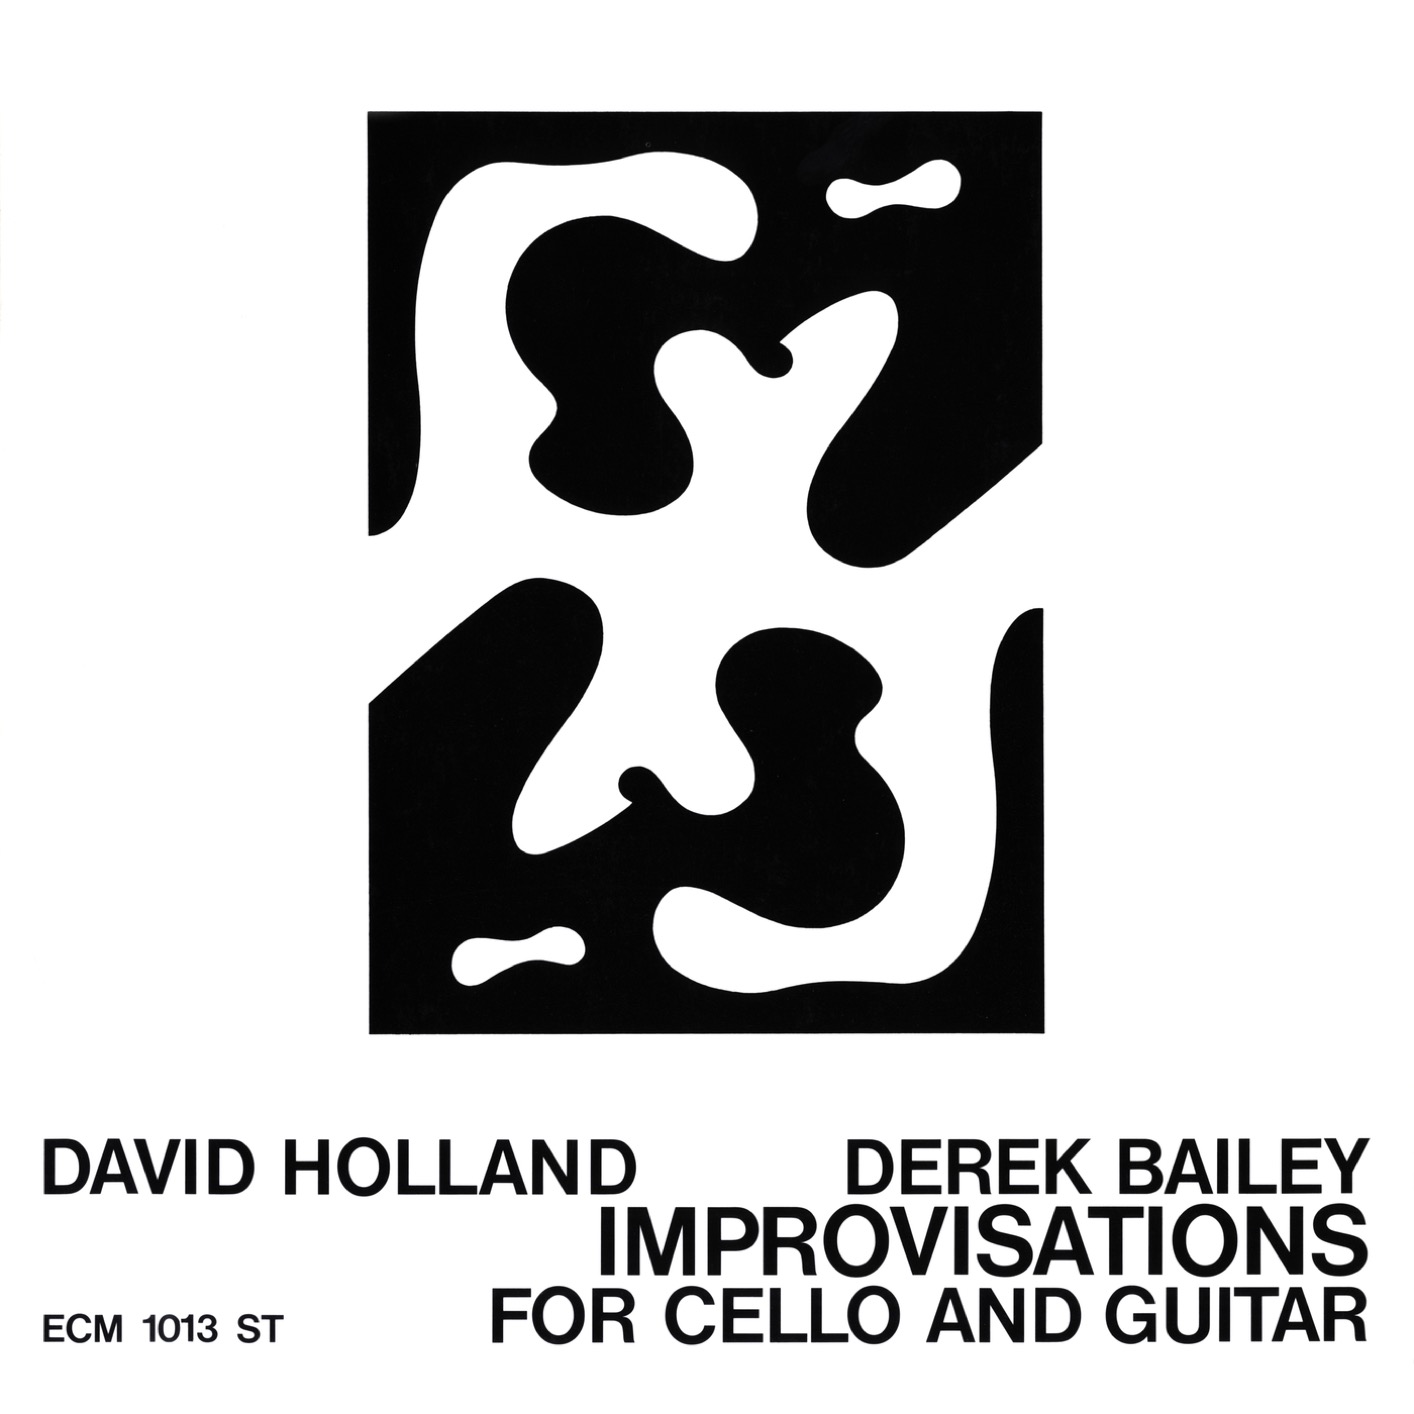 Dave Holland, Derek Bailey - Improvisations For Cello And Guitar - Live At Little Theater Club, London 1971 (1971/2019) [FLAC 24bit/96kHz]